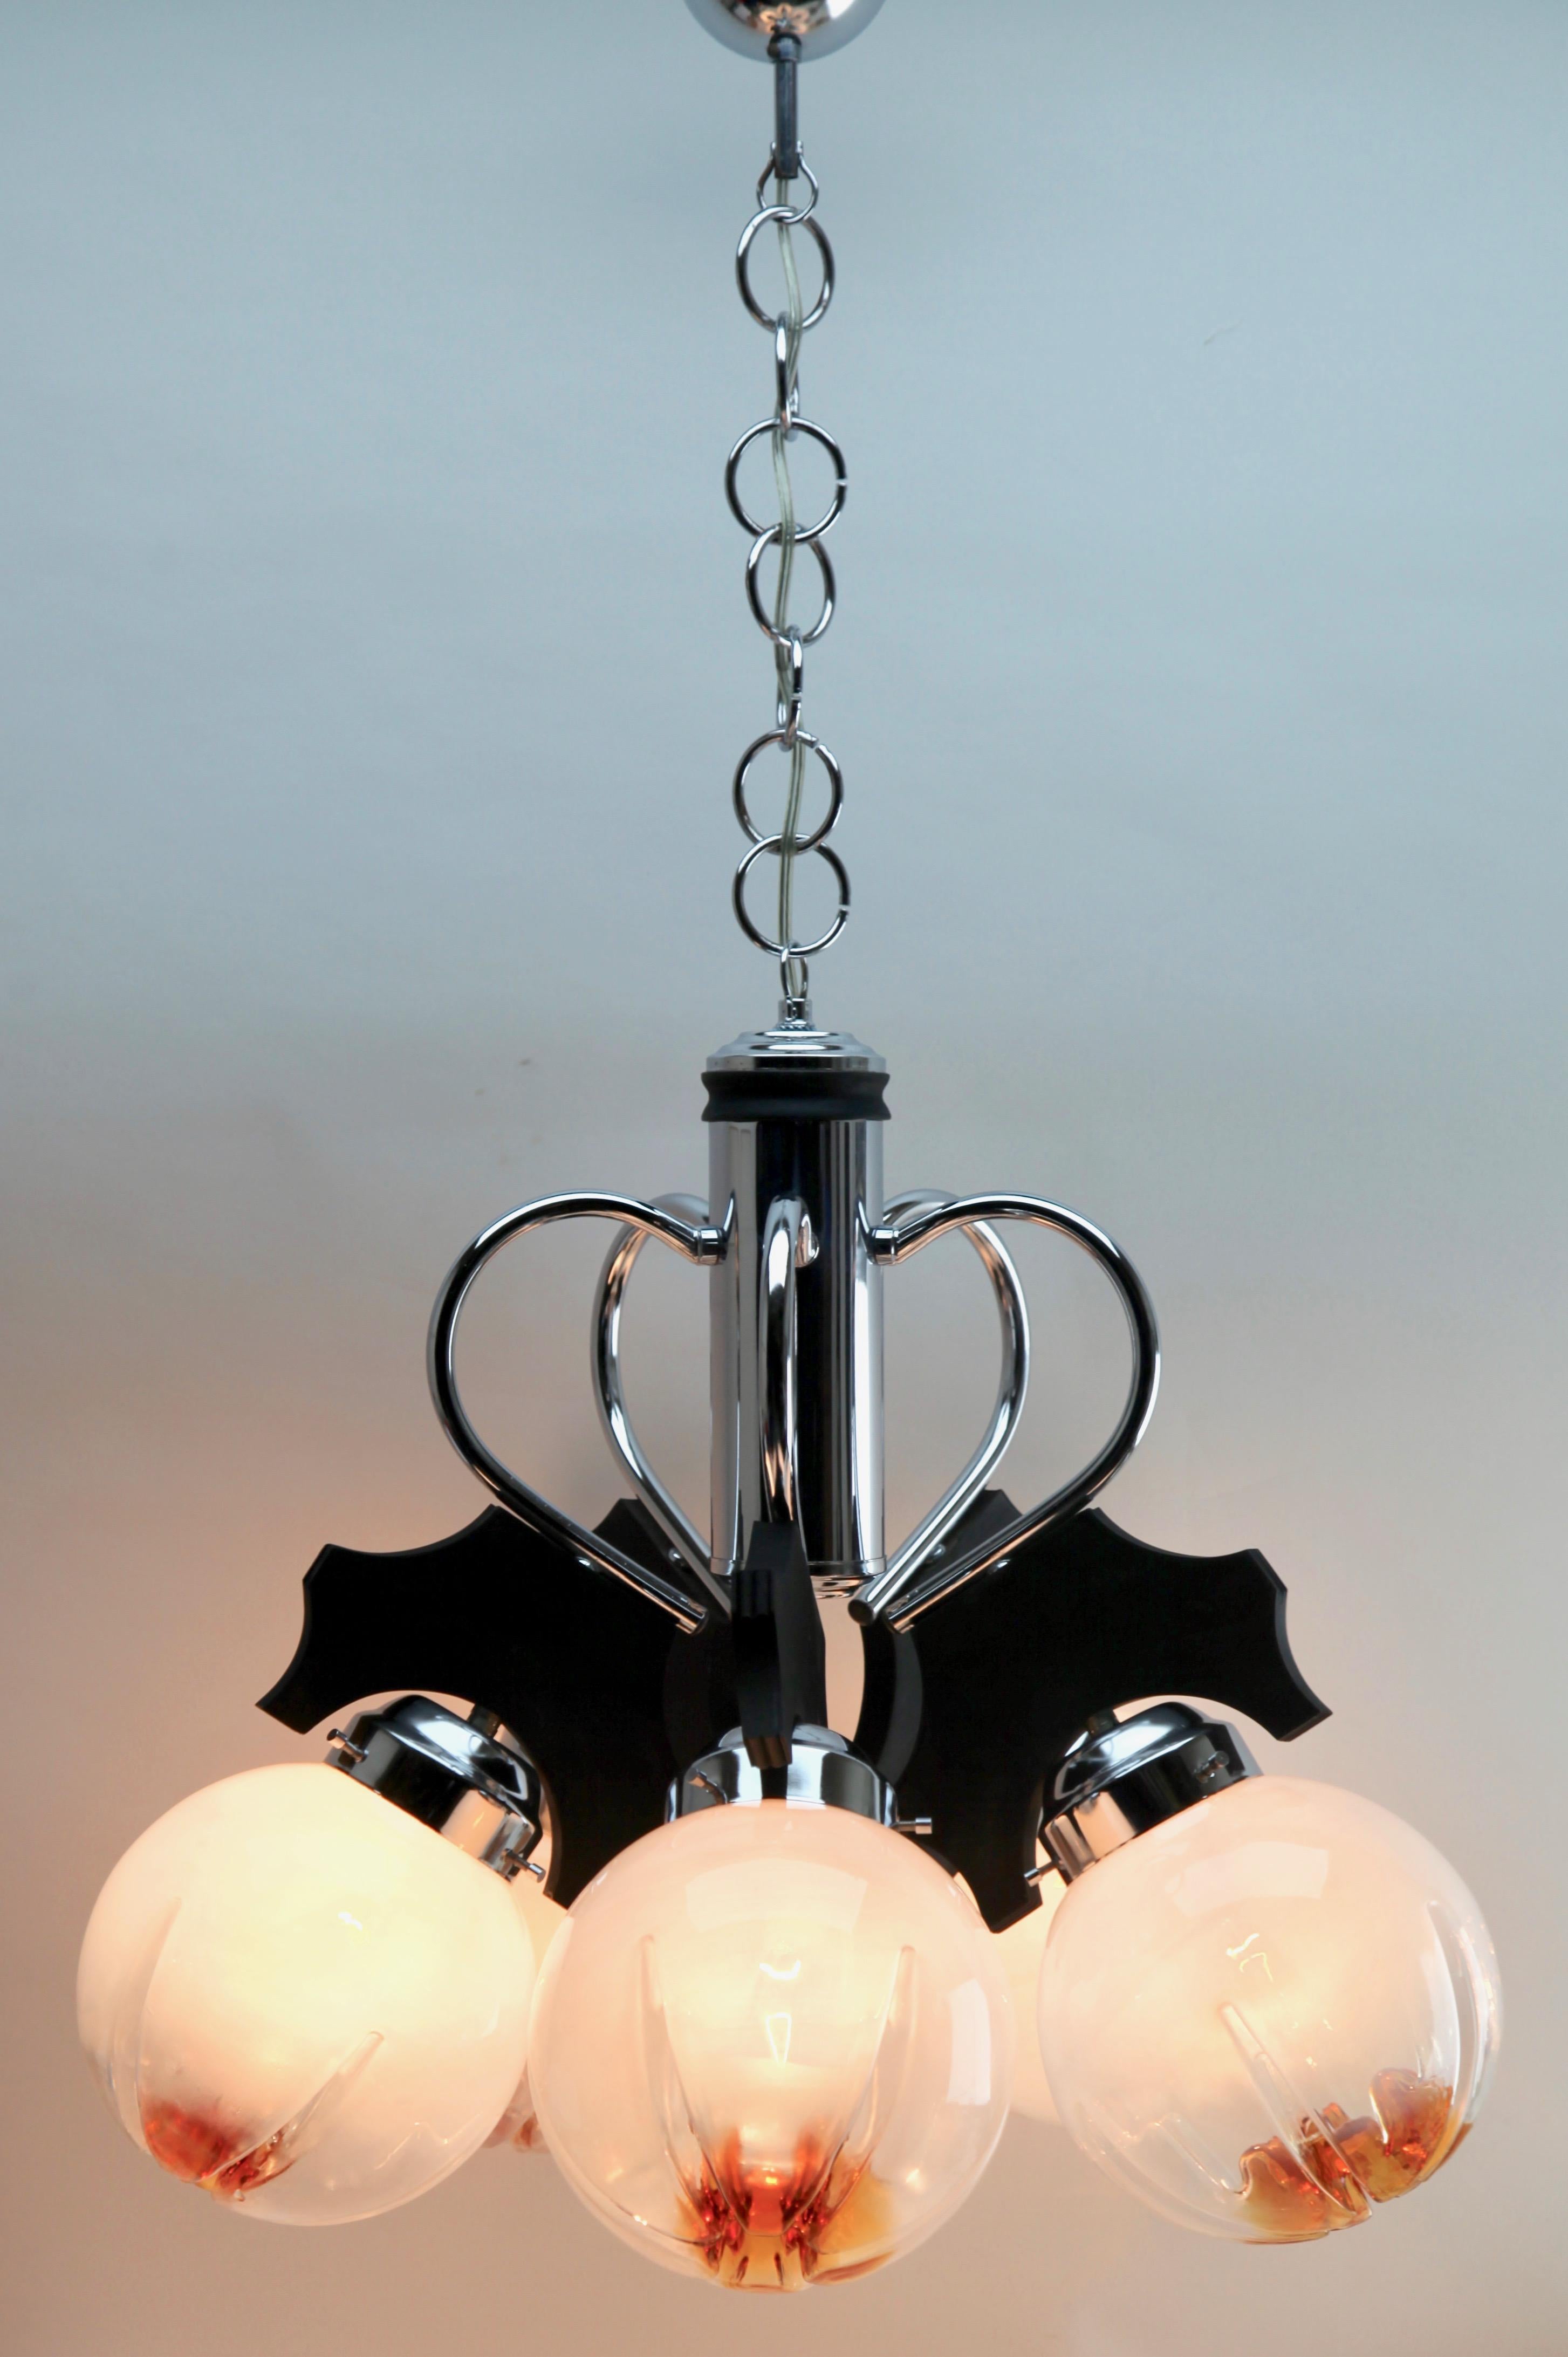 Mid-20th Century Pendant by Mazzega with 5 Globes of Clear Glass with Orange Inclusions For Sale